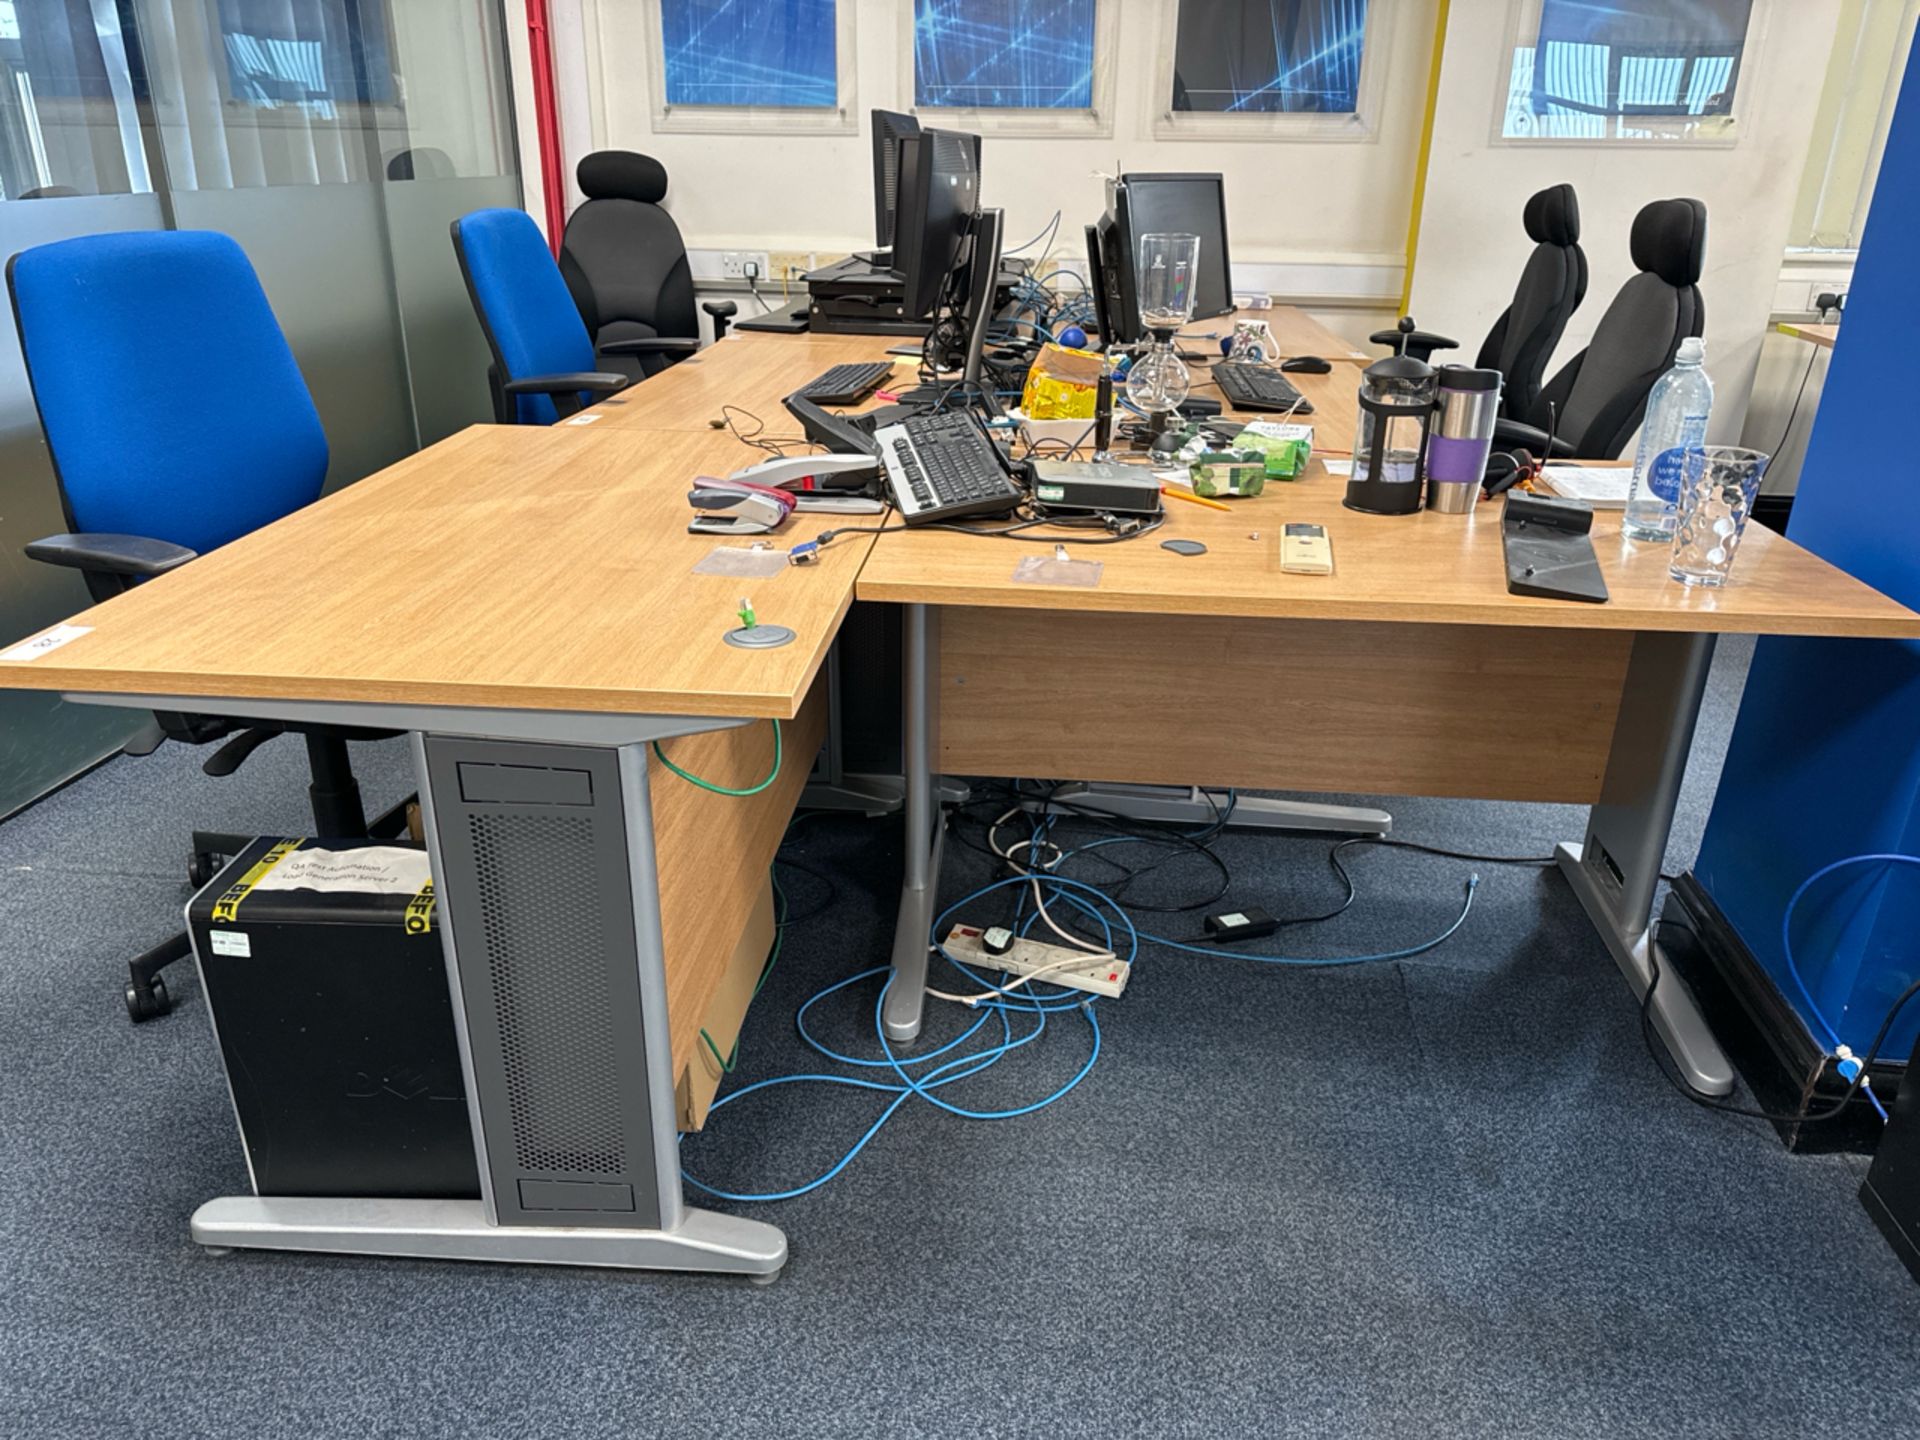 Bank Of 6 Office Desks & Chairs - Image 2 of 5